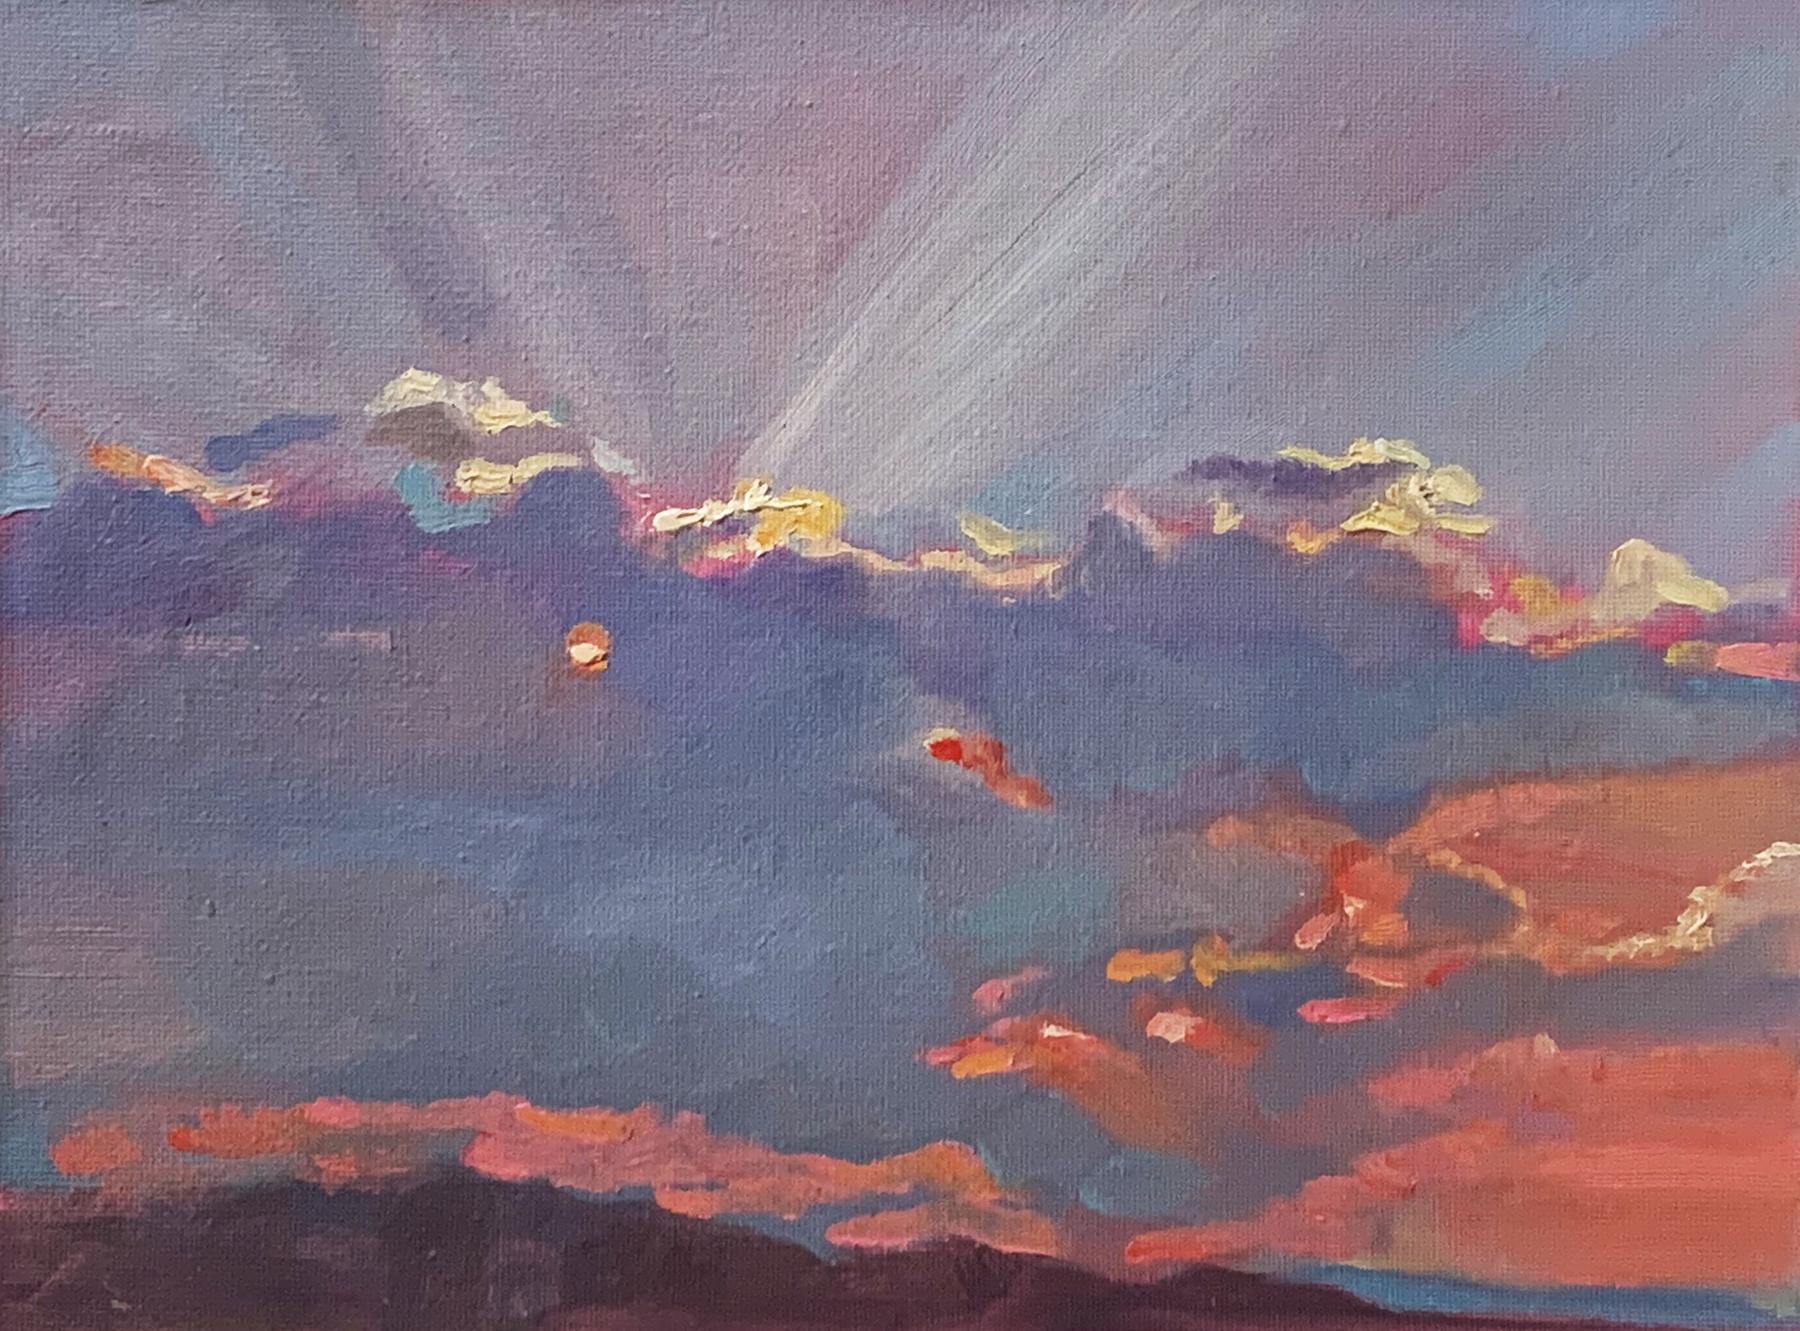 Carl Grauer Landscape Painting - July 26, 2021 (Dramatic Pink Sunset Illuminating Clouds, oil on canvas, framed)